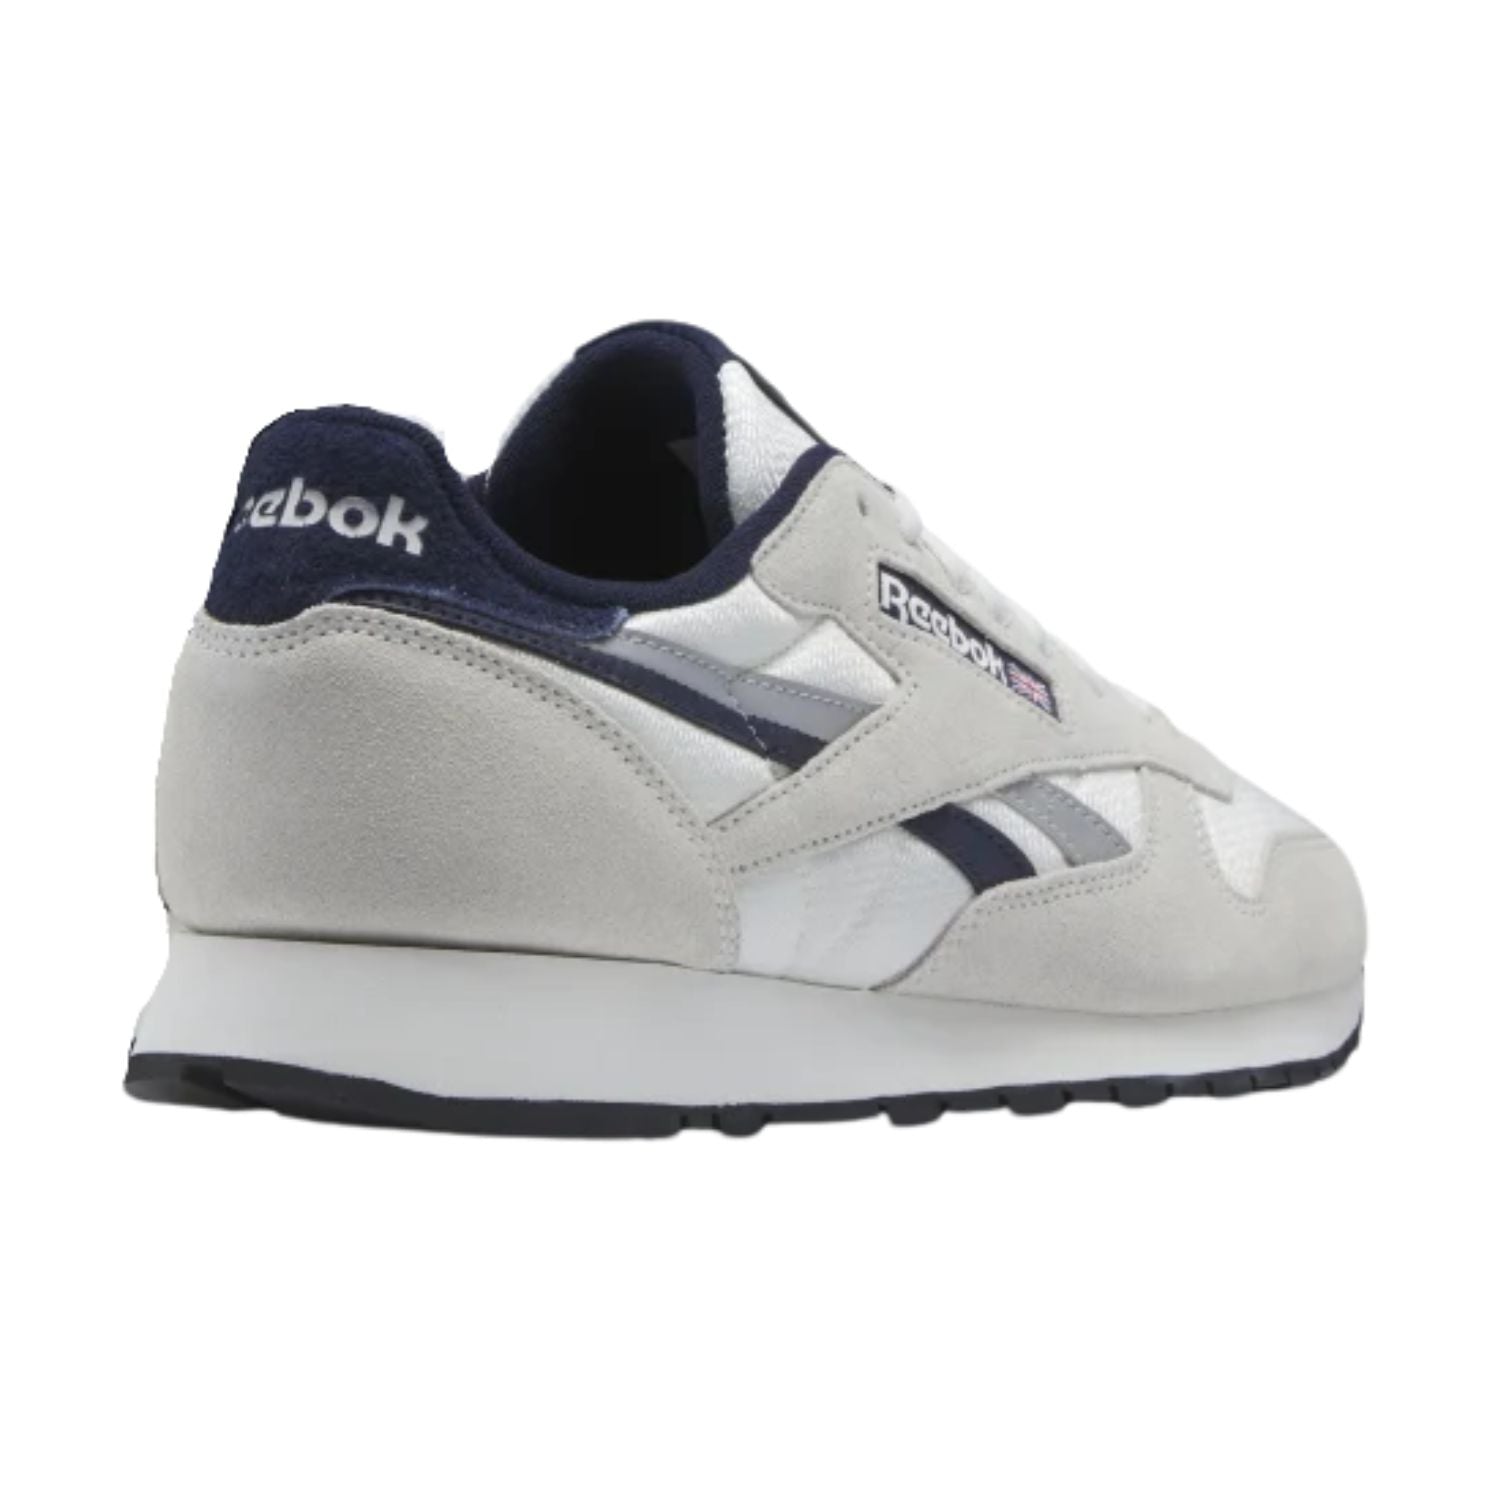 Reebok Classics Leather Mens Style : Gy7302